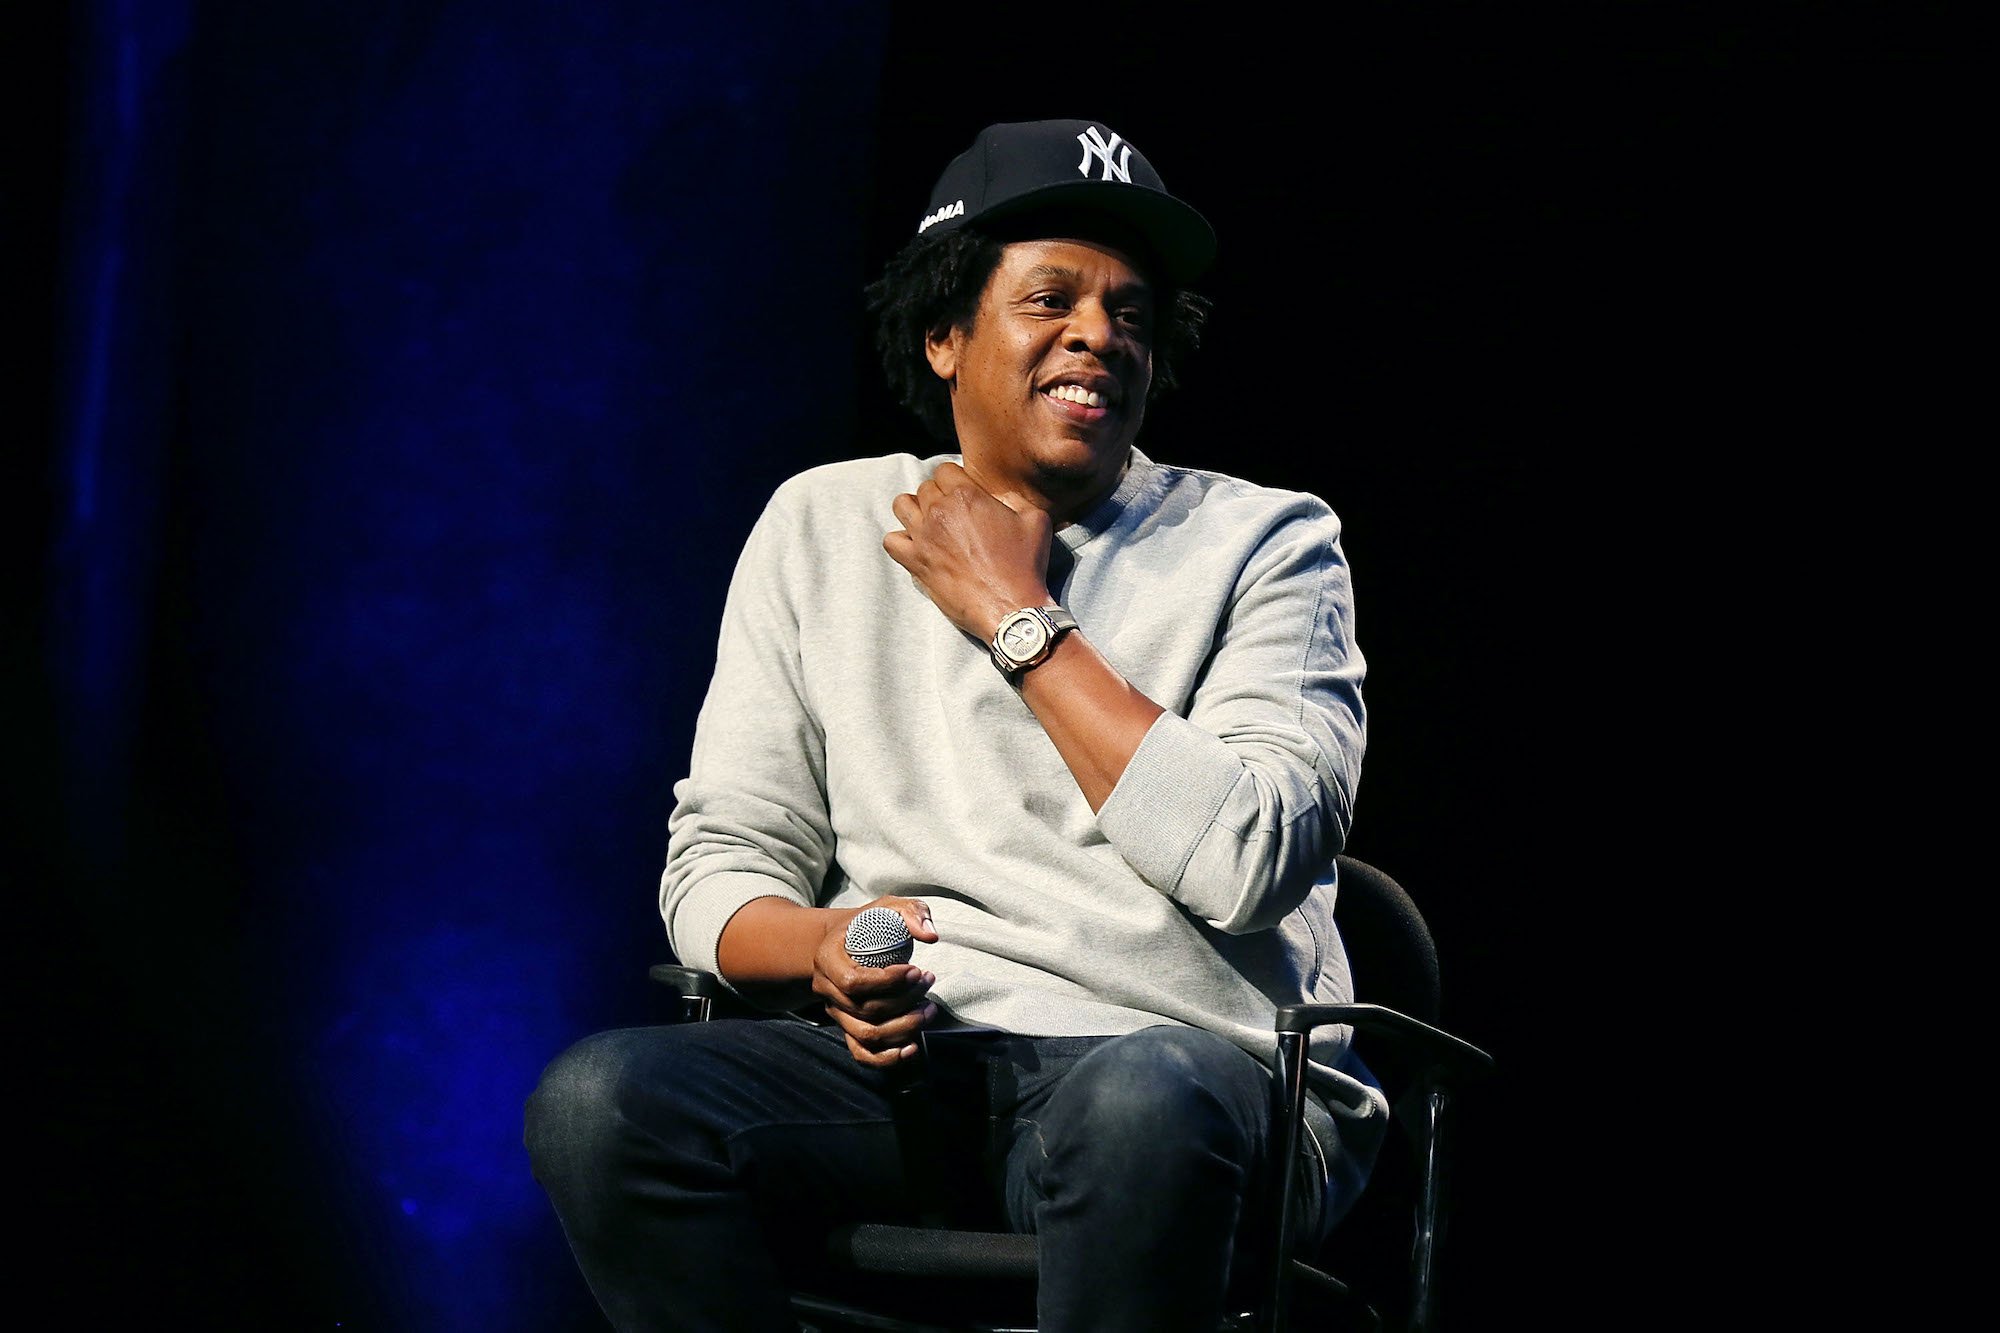 Jay Z May Have Dropped Out Of High School But He Believes Education Is Super Important